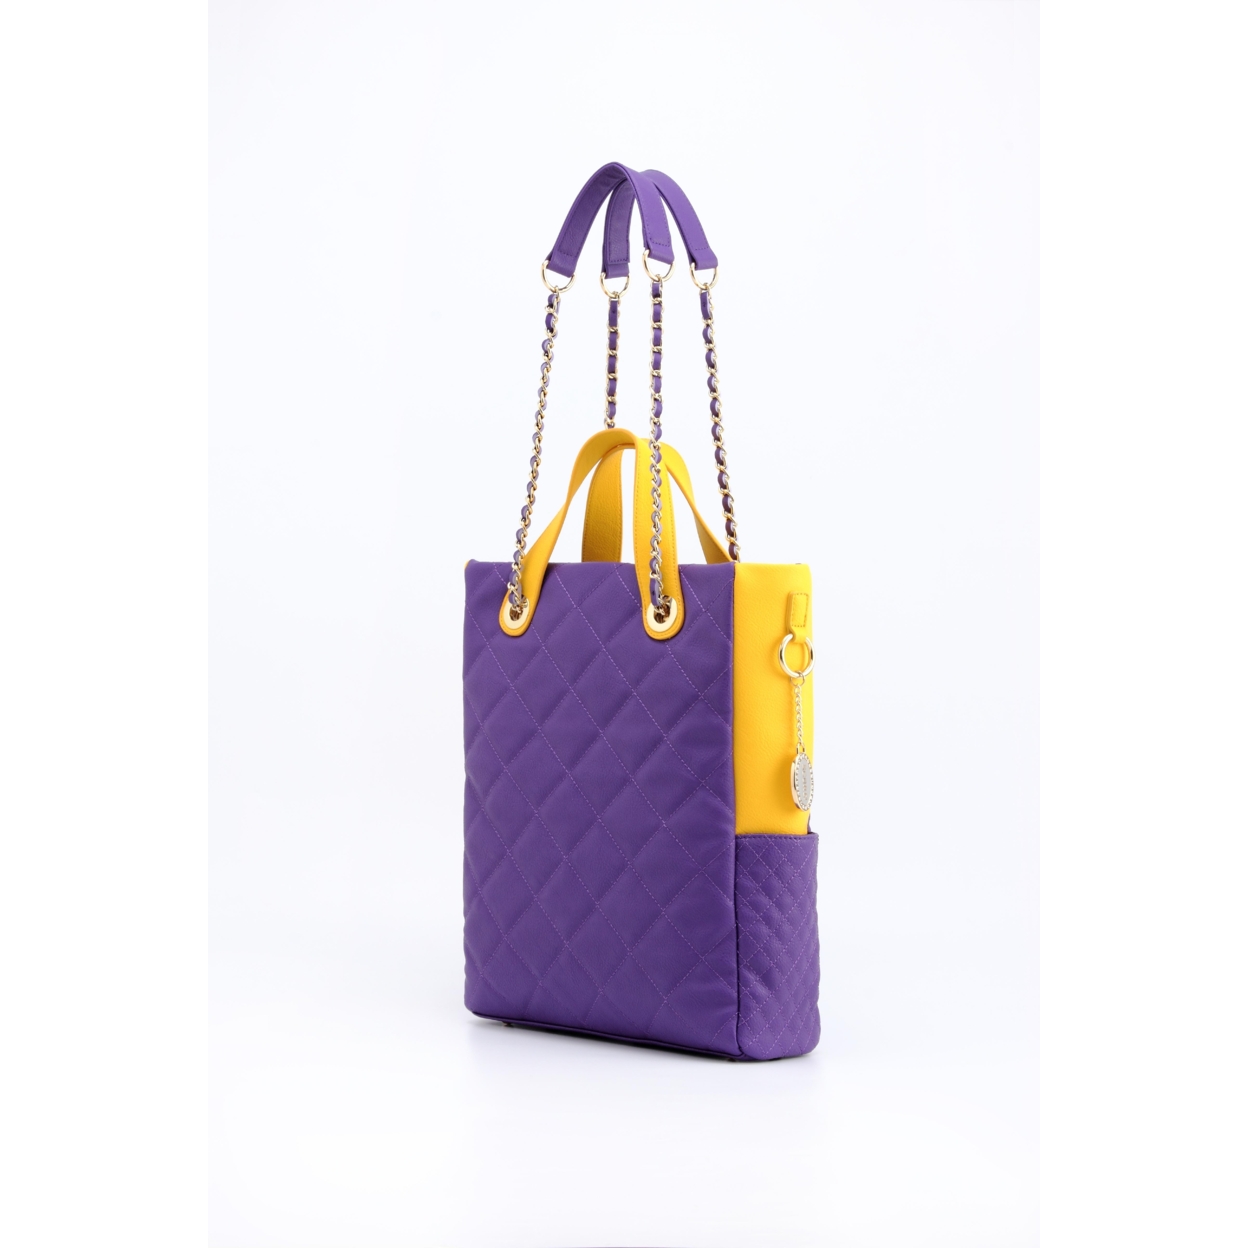 SCORE!'s Kat Travel Tote For Business, Work, Or School Quilted Shoulder Bag - Purple And Gold Yellow